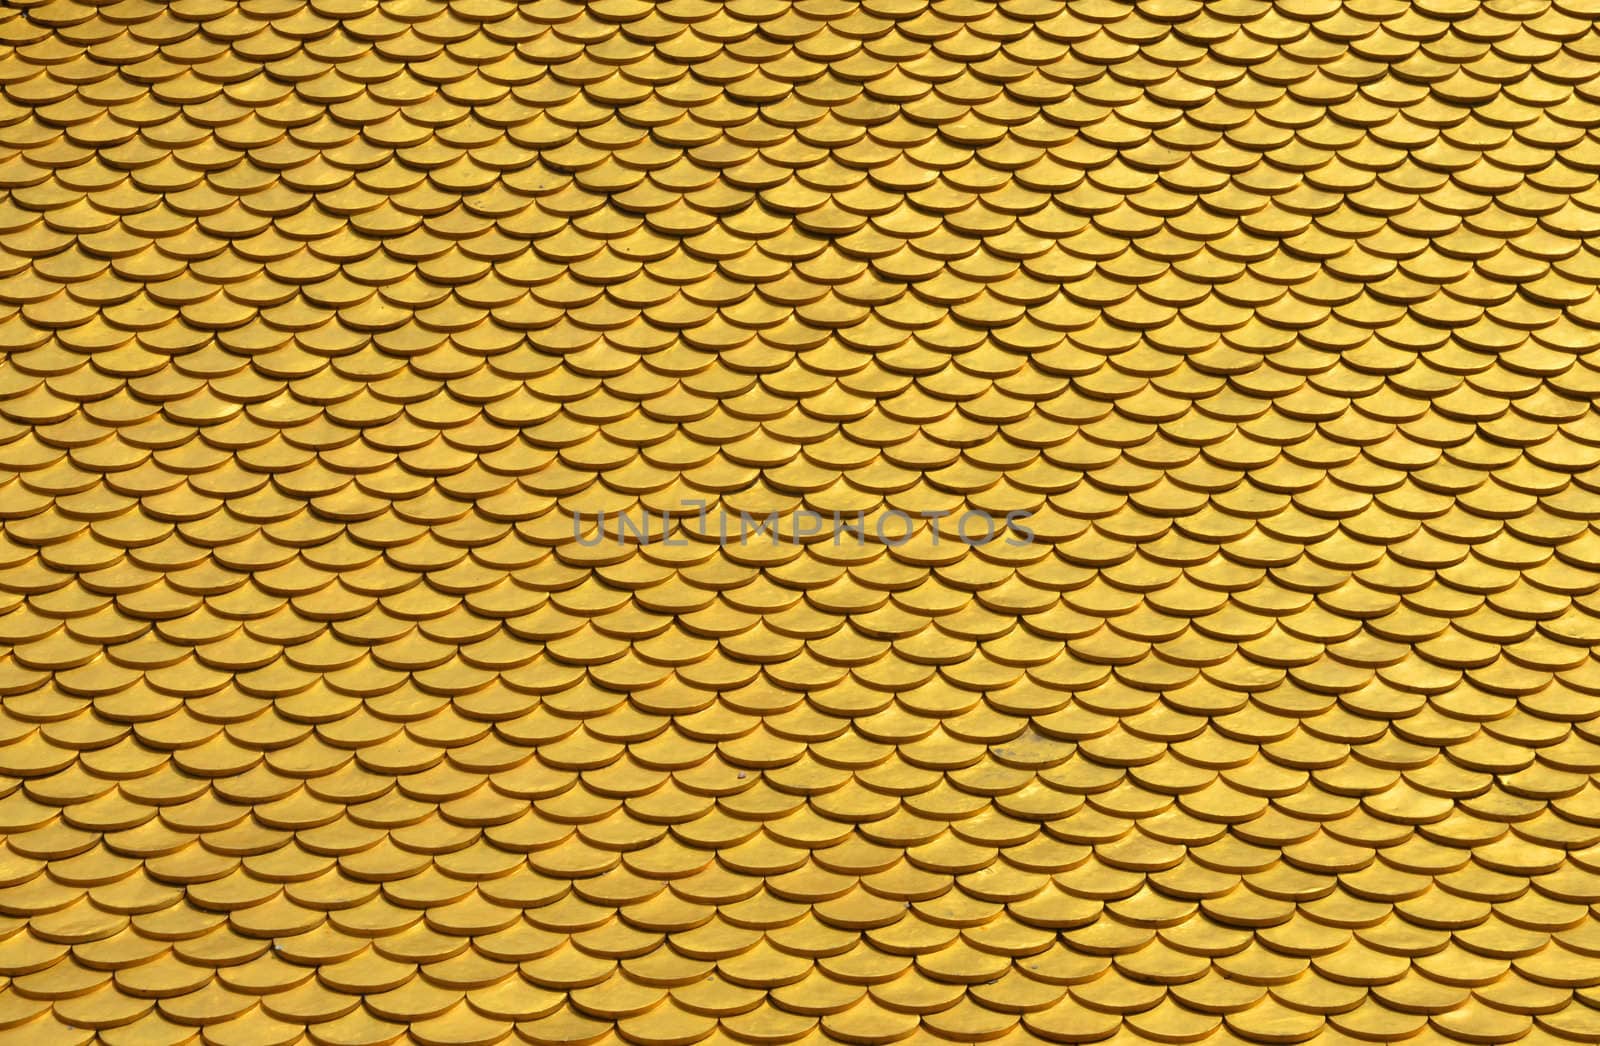 Golden roof texture from Chengde buddhist temple in China.